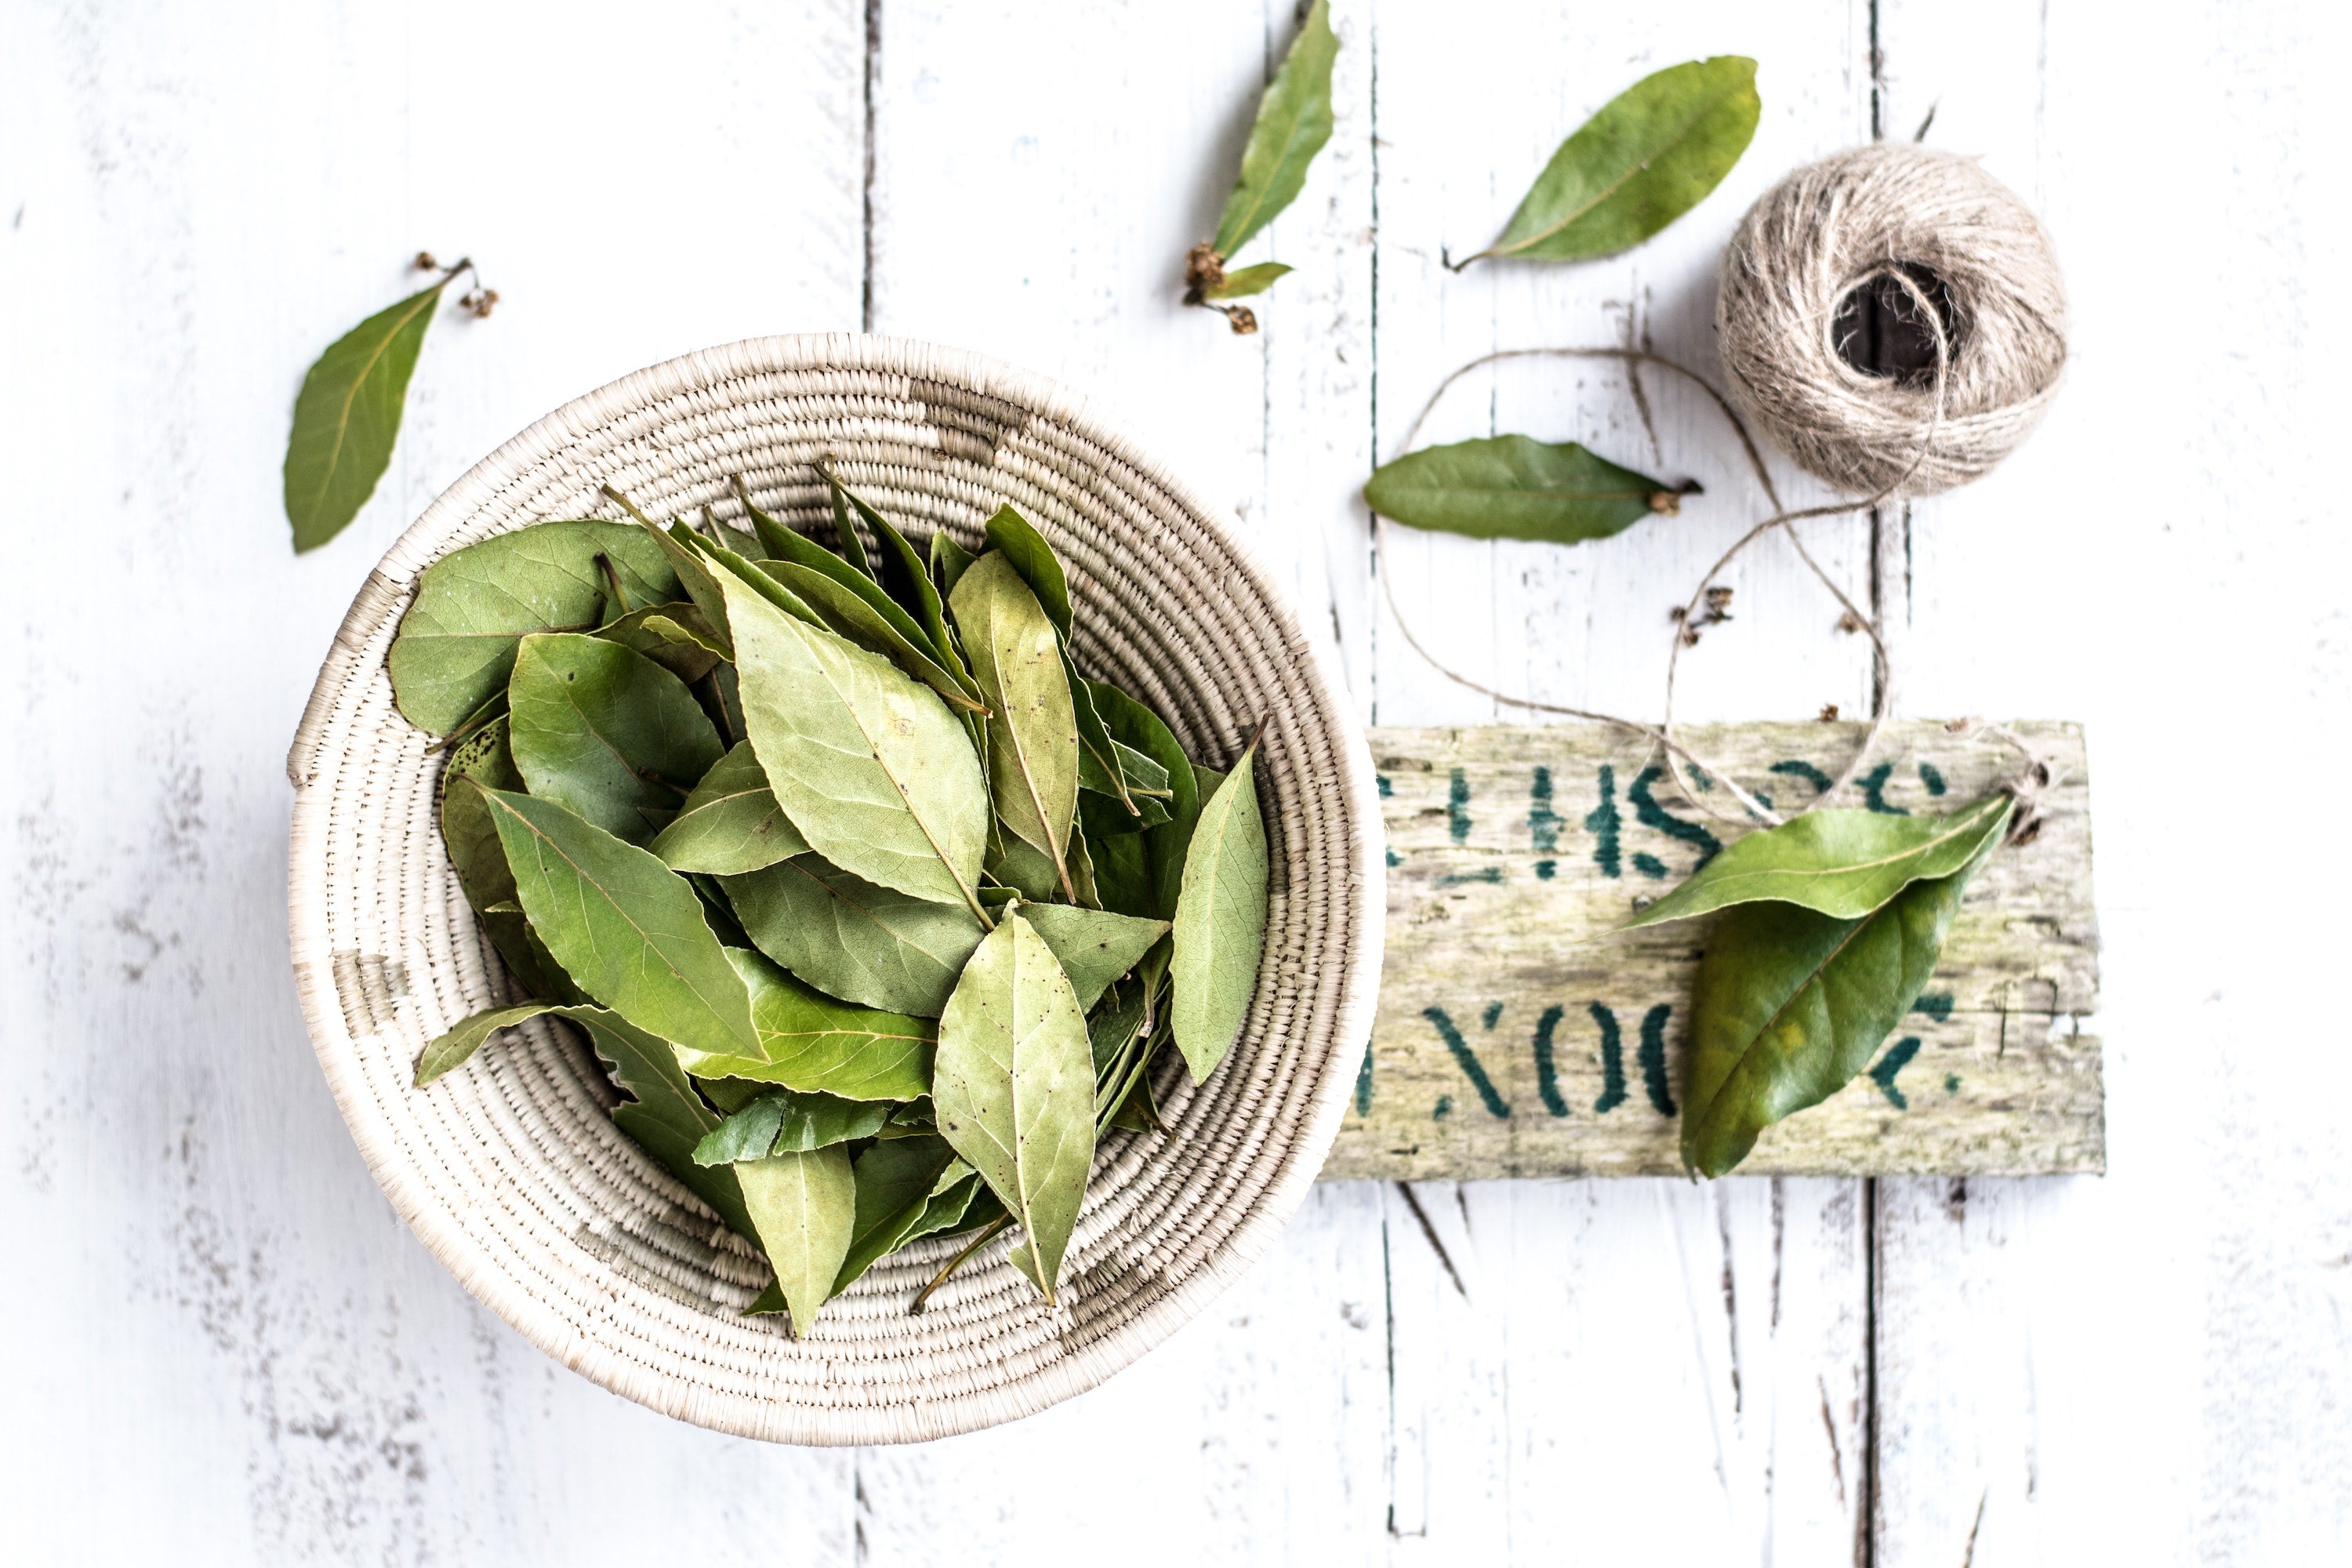 Herb of the Month: Bay Leaf